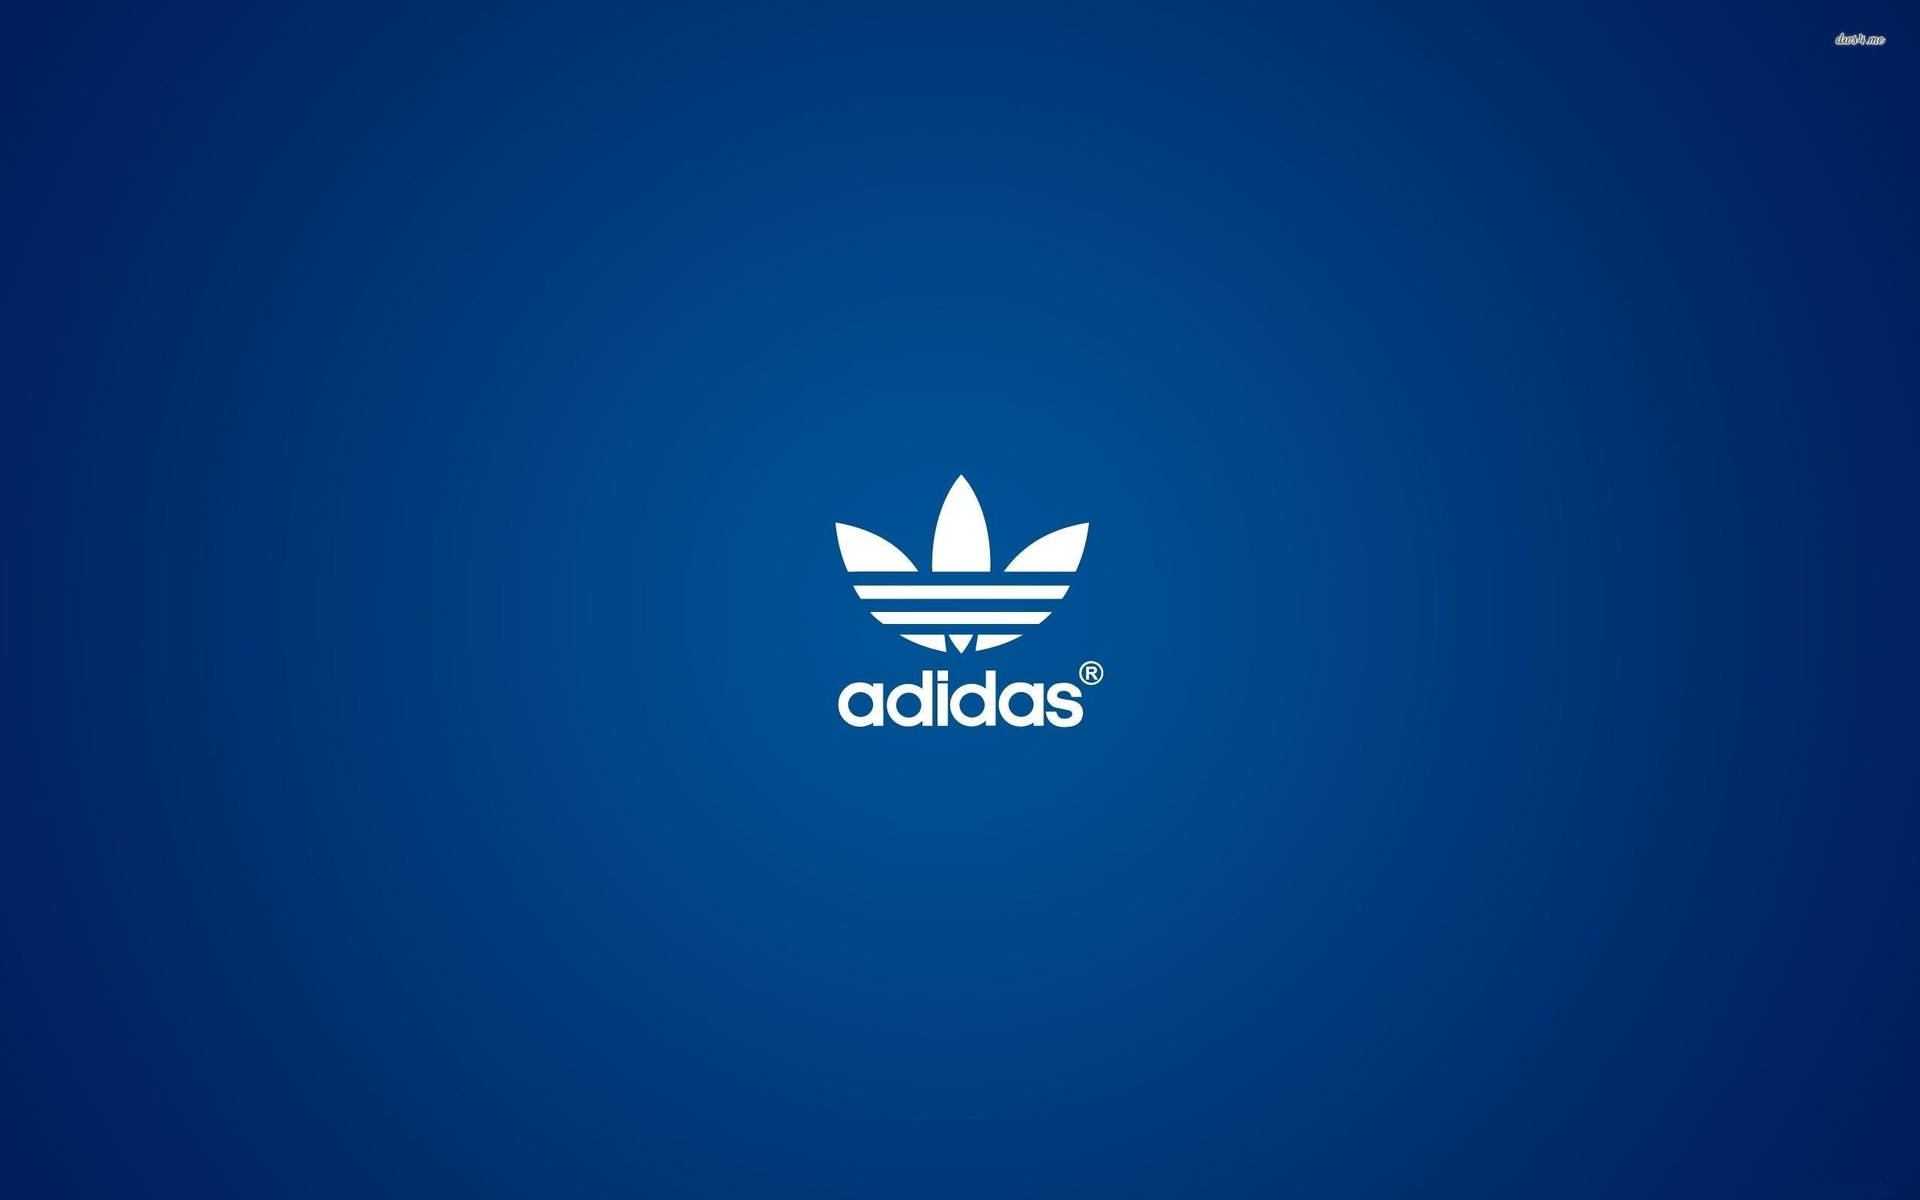 Get Ready To Flex In The Classic Adidas Blue. Background